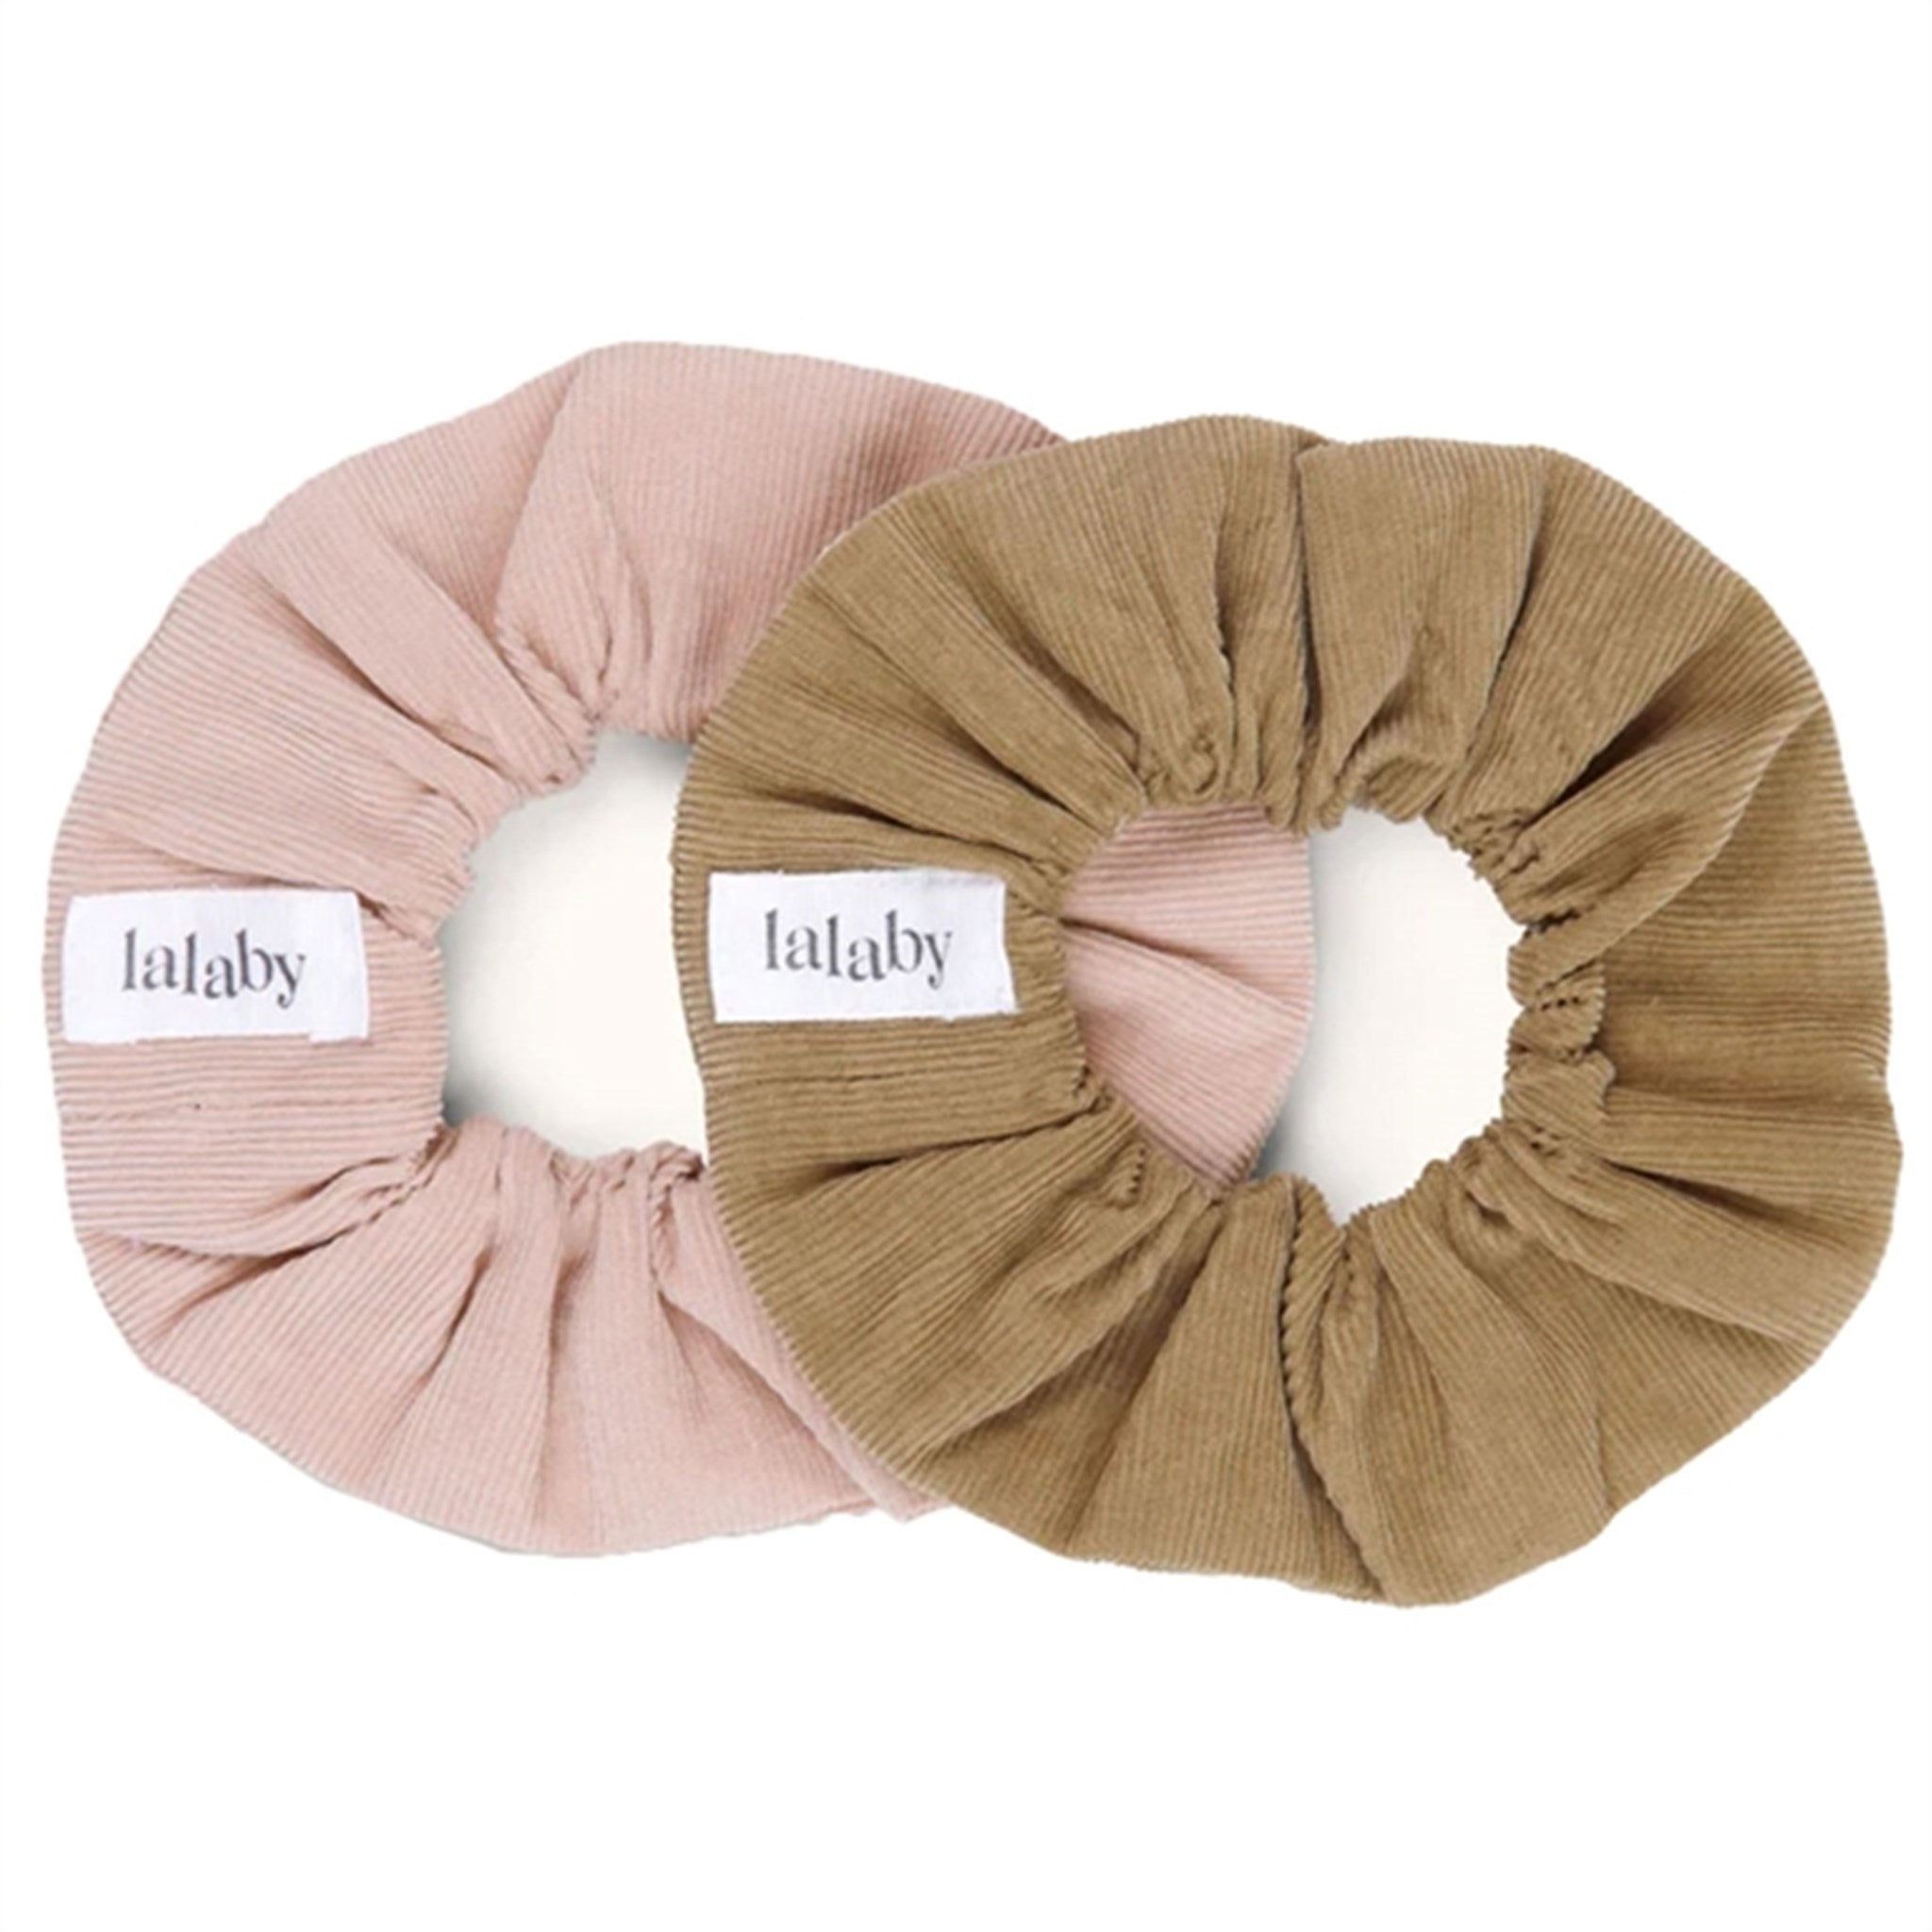 lalaby Beige Old Rose Scrunchie 2-pack